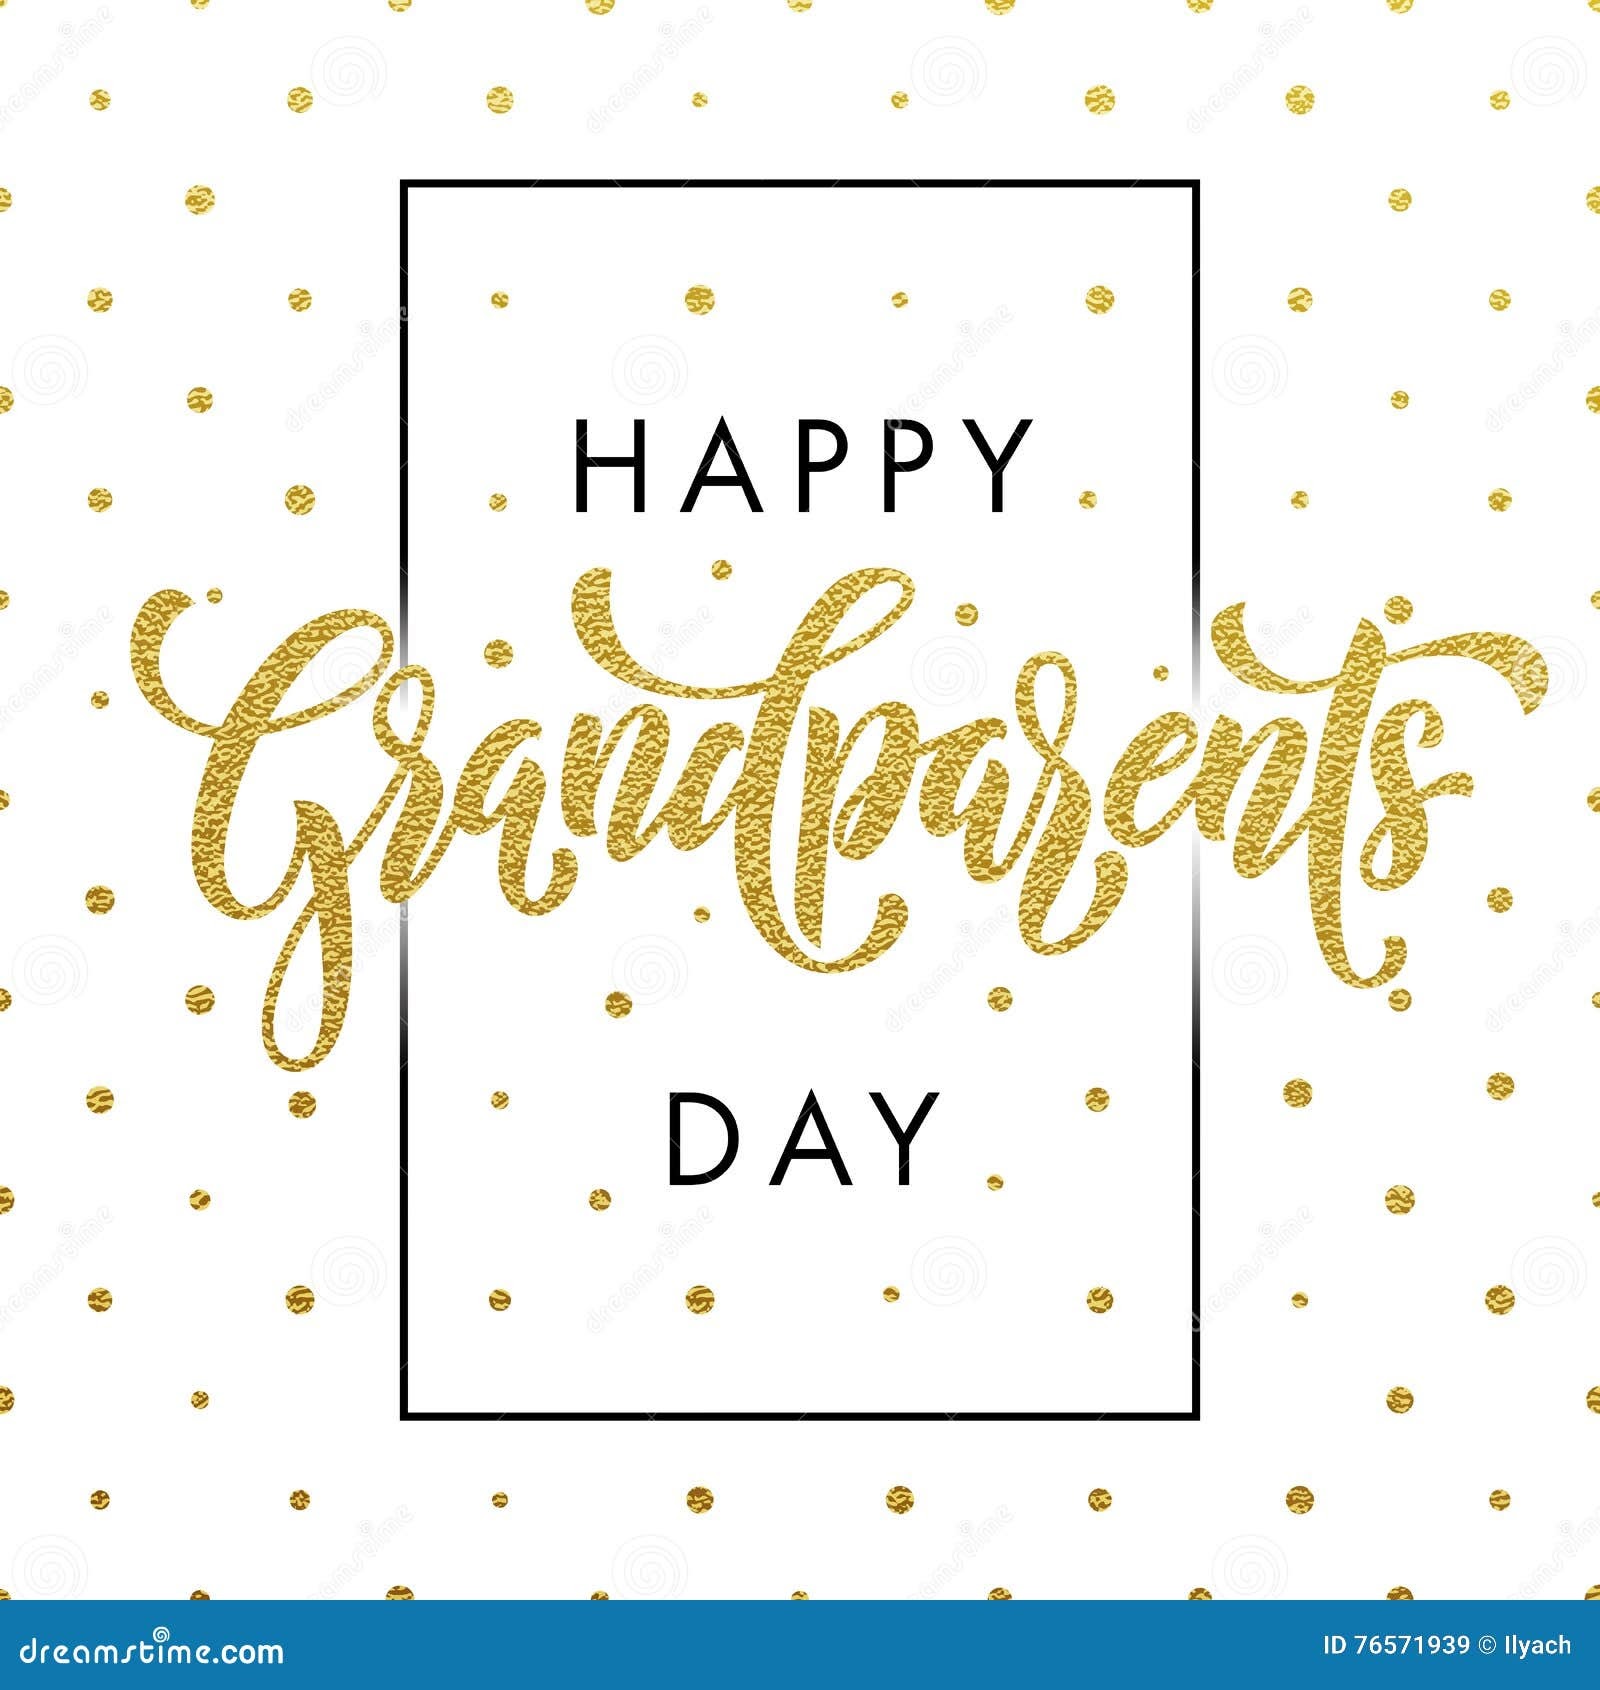 Download Happy Grandpa Day Card - 156+ Popular SVG File for Cricut, Silhouette and Other Machine